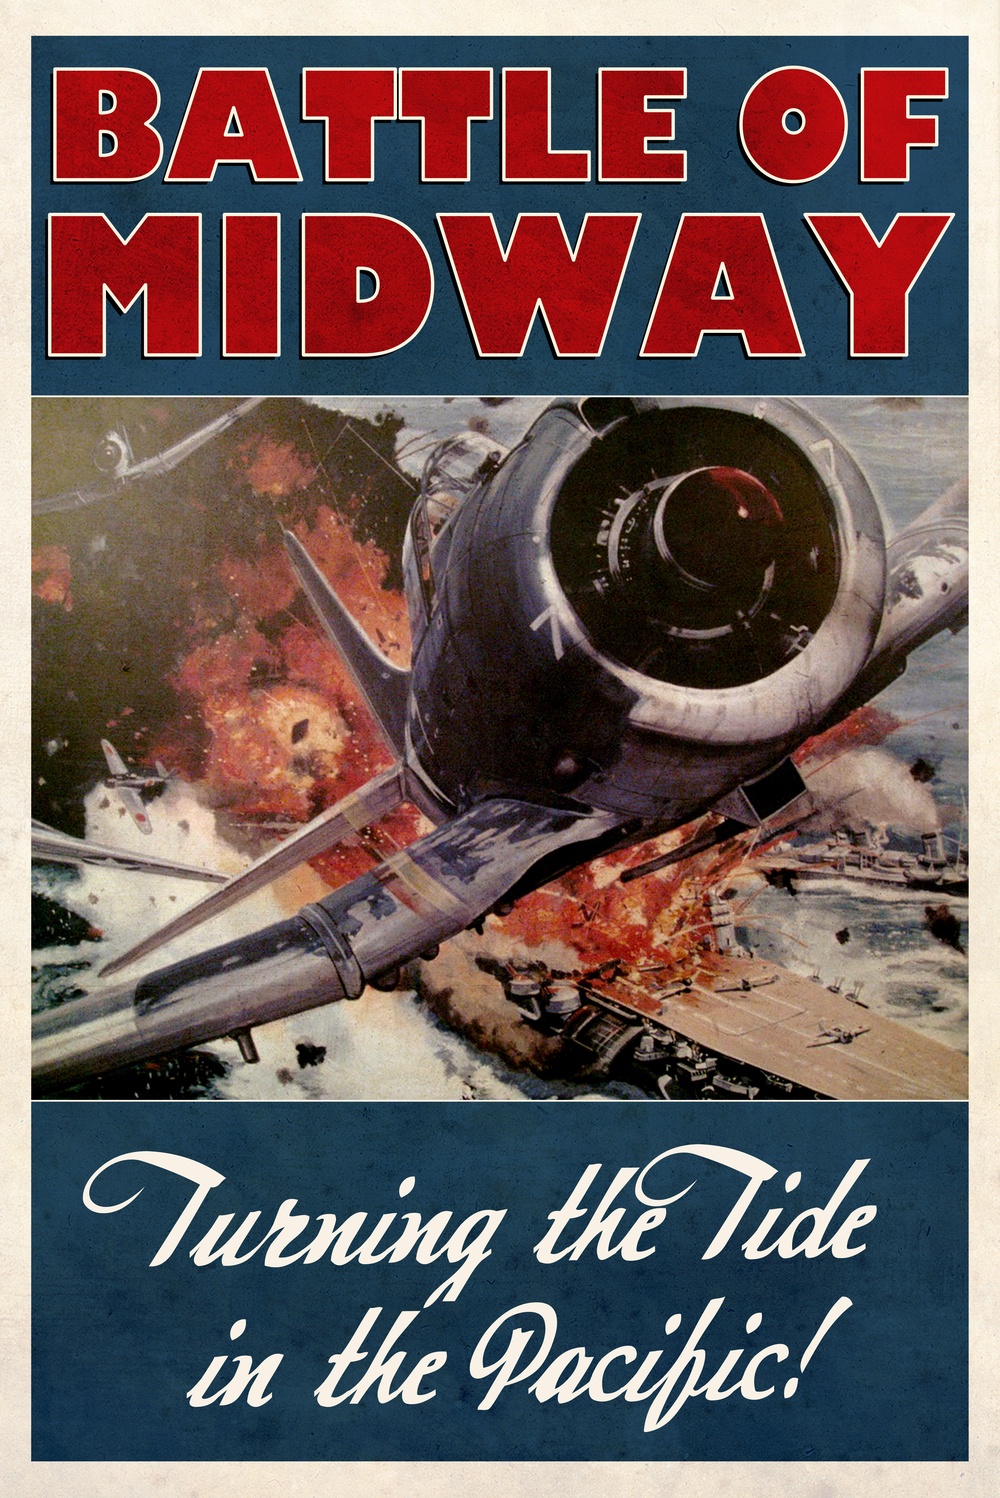 Midway remembrance posters